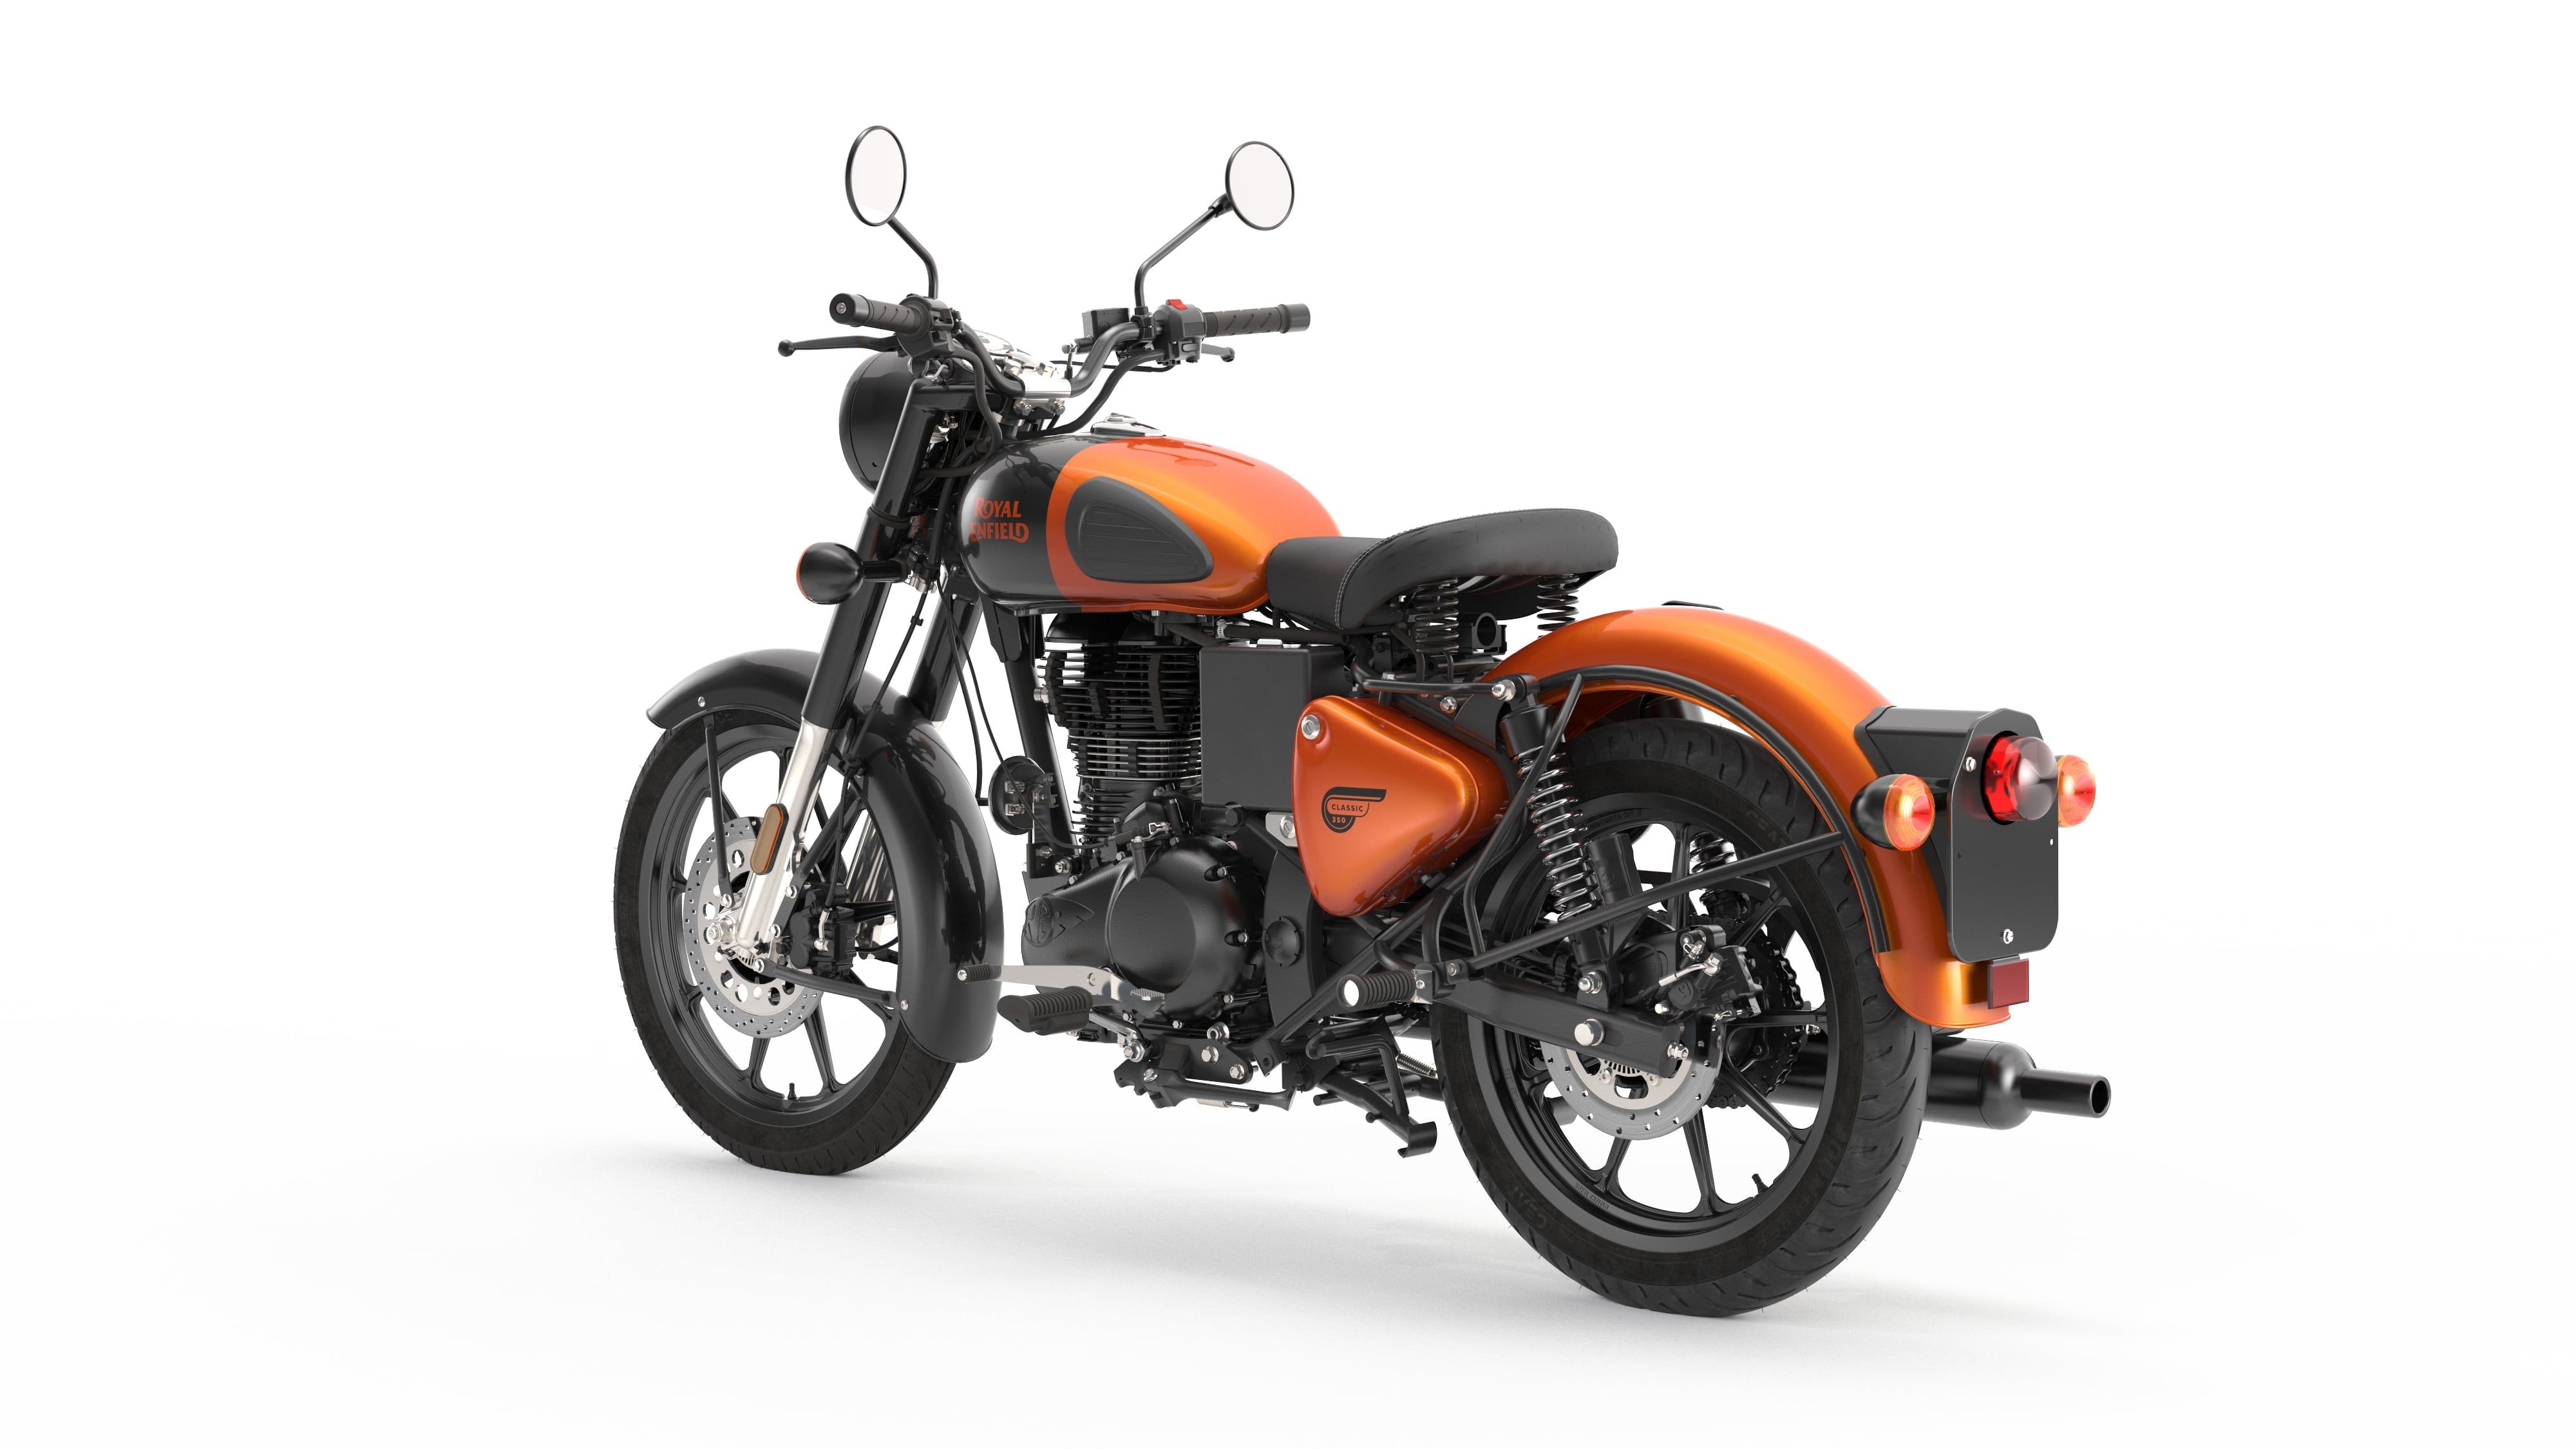 The Classic 350 Royal Enfield's best selling motorcycle